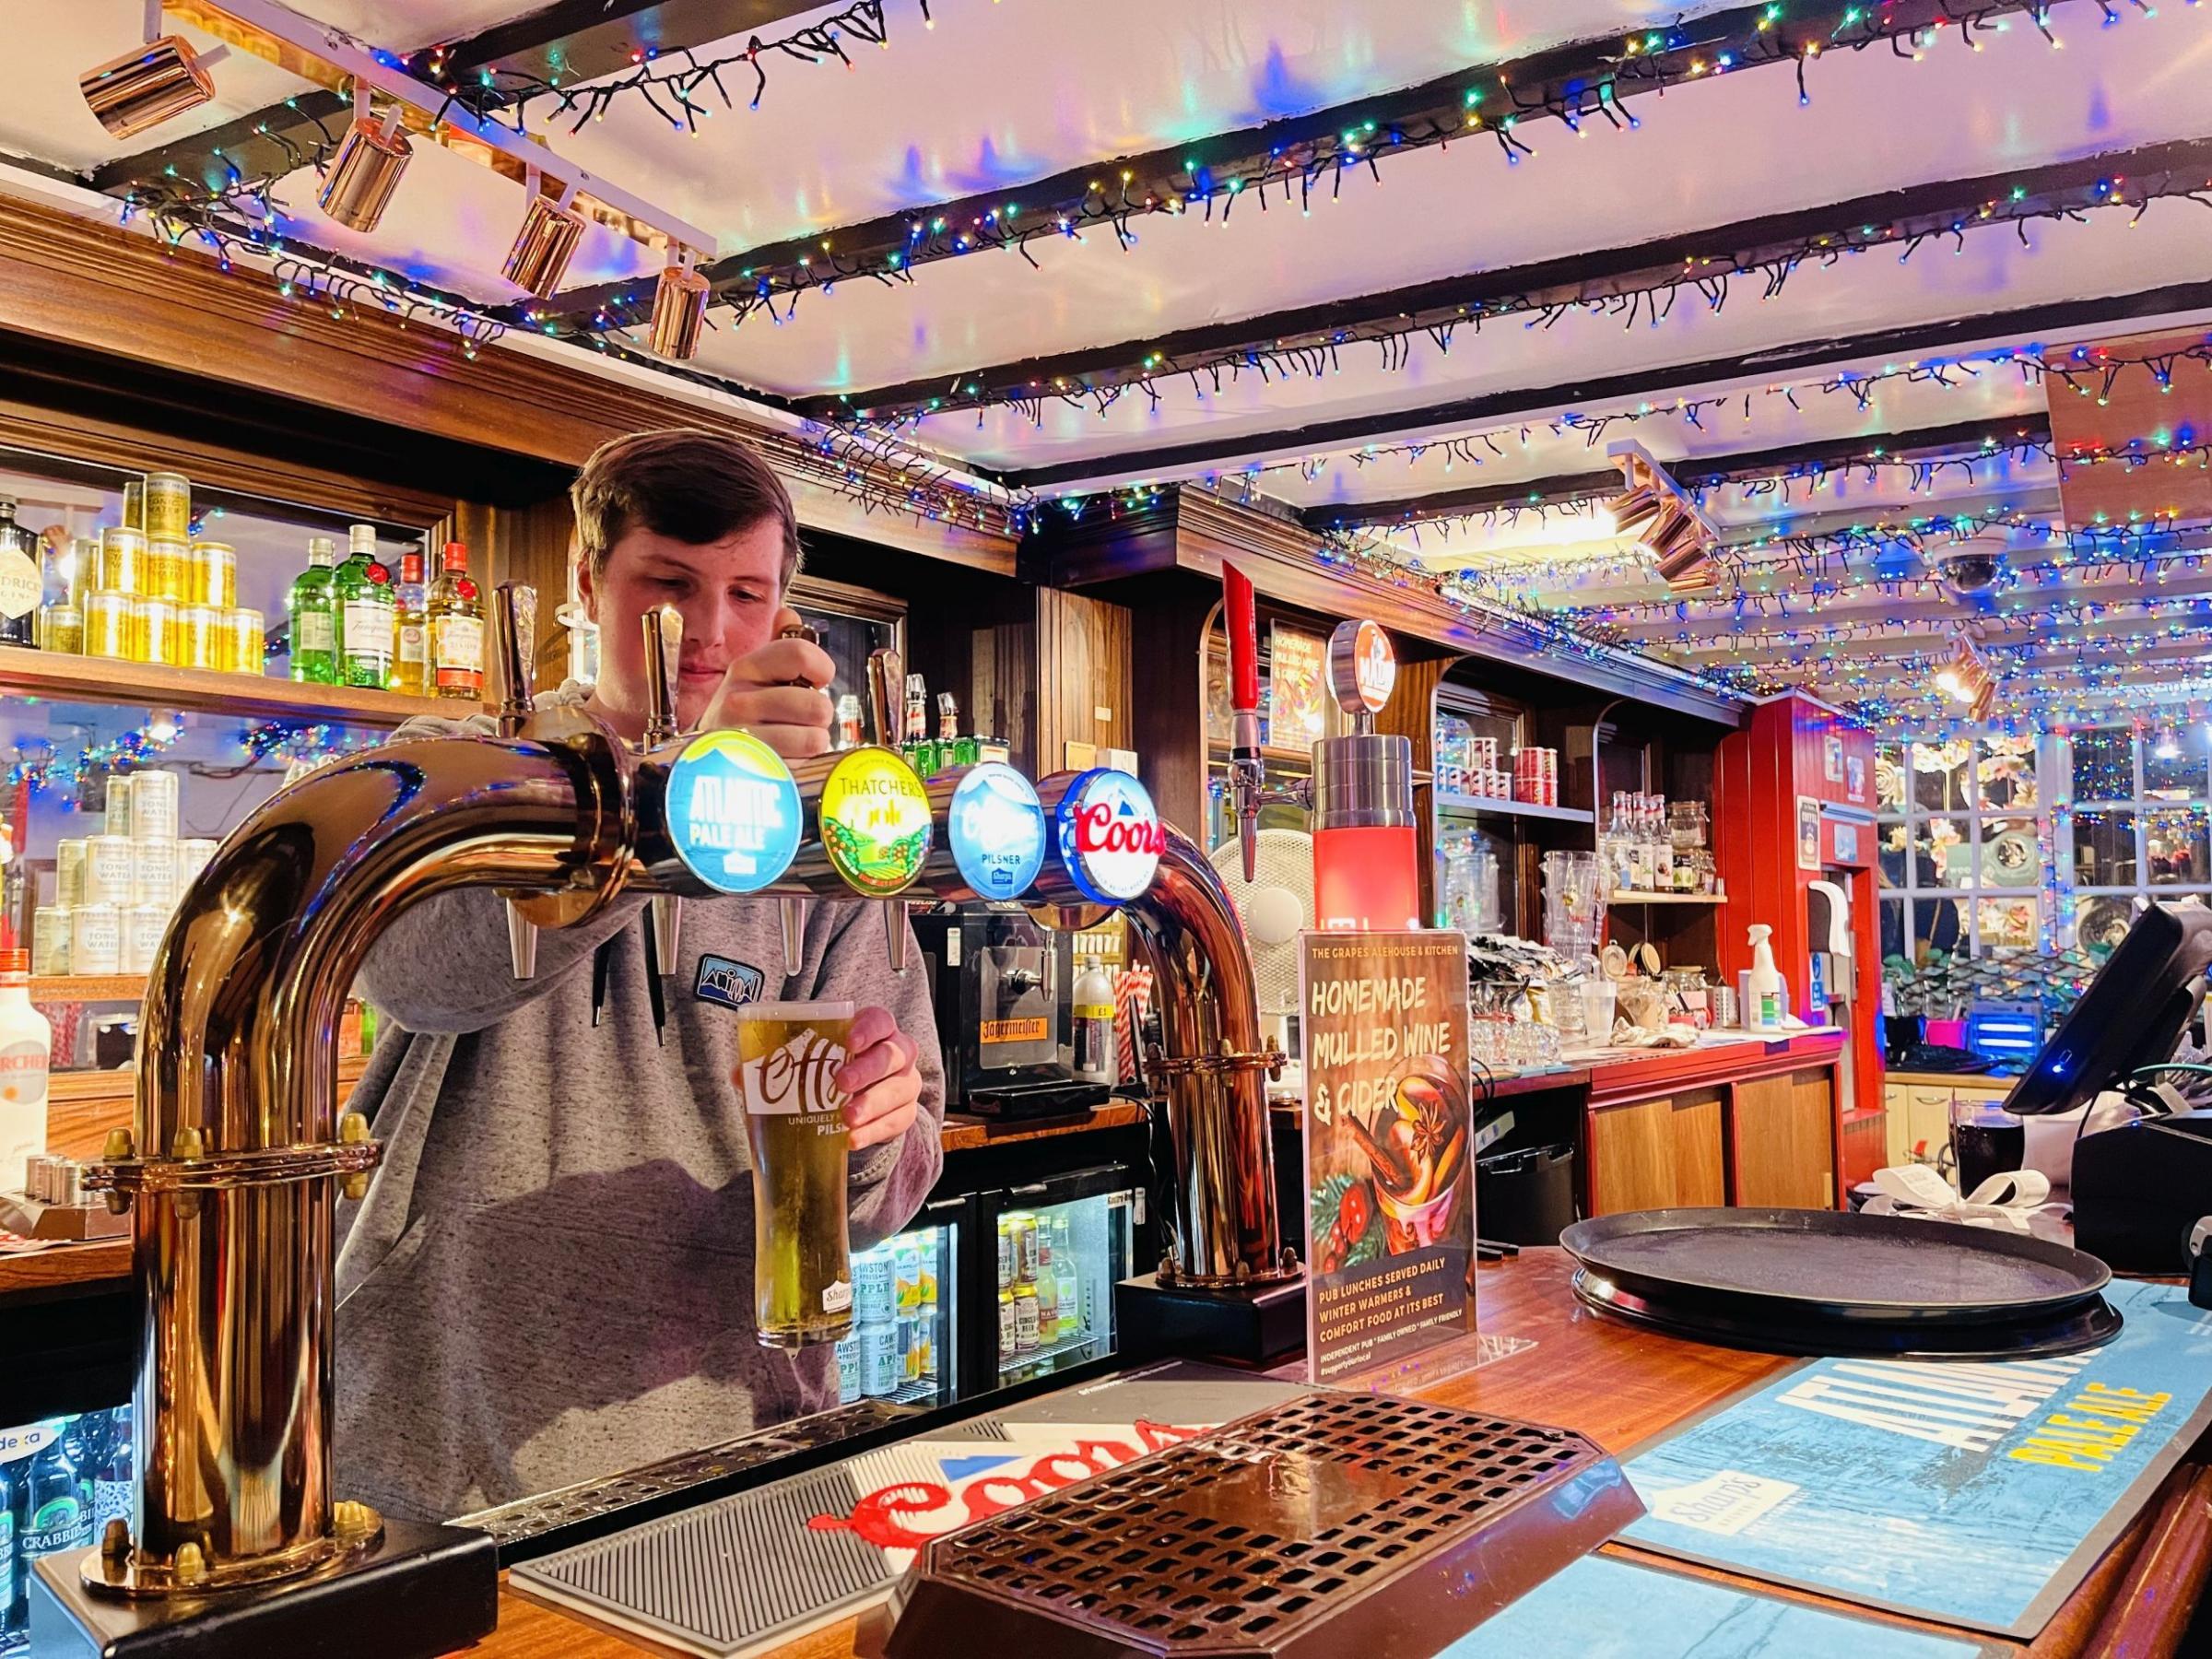 n Leon works at The Grapes, a popular Falmouth pub well known for its iconic brightly coloured fairy lights. On this day, Leon started at 5pm to finish at 2am.